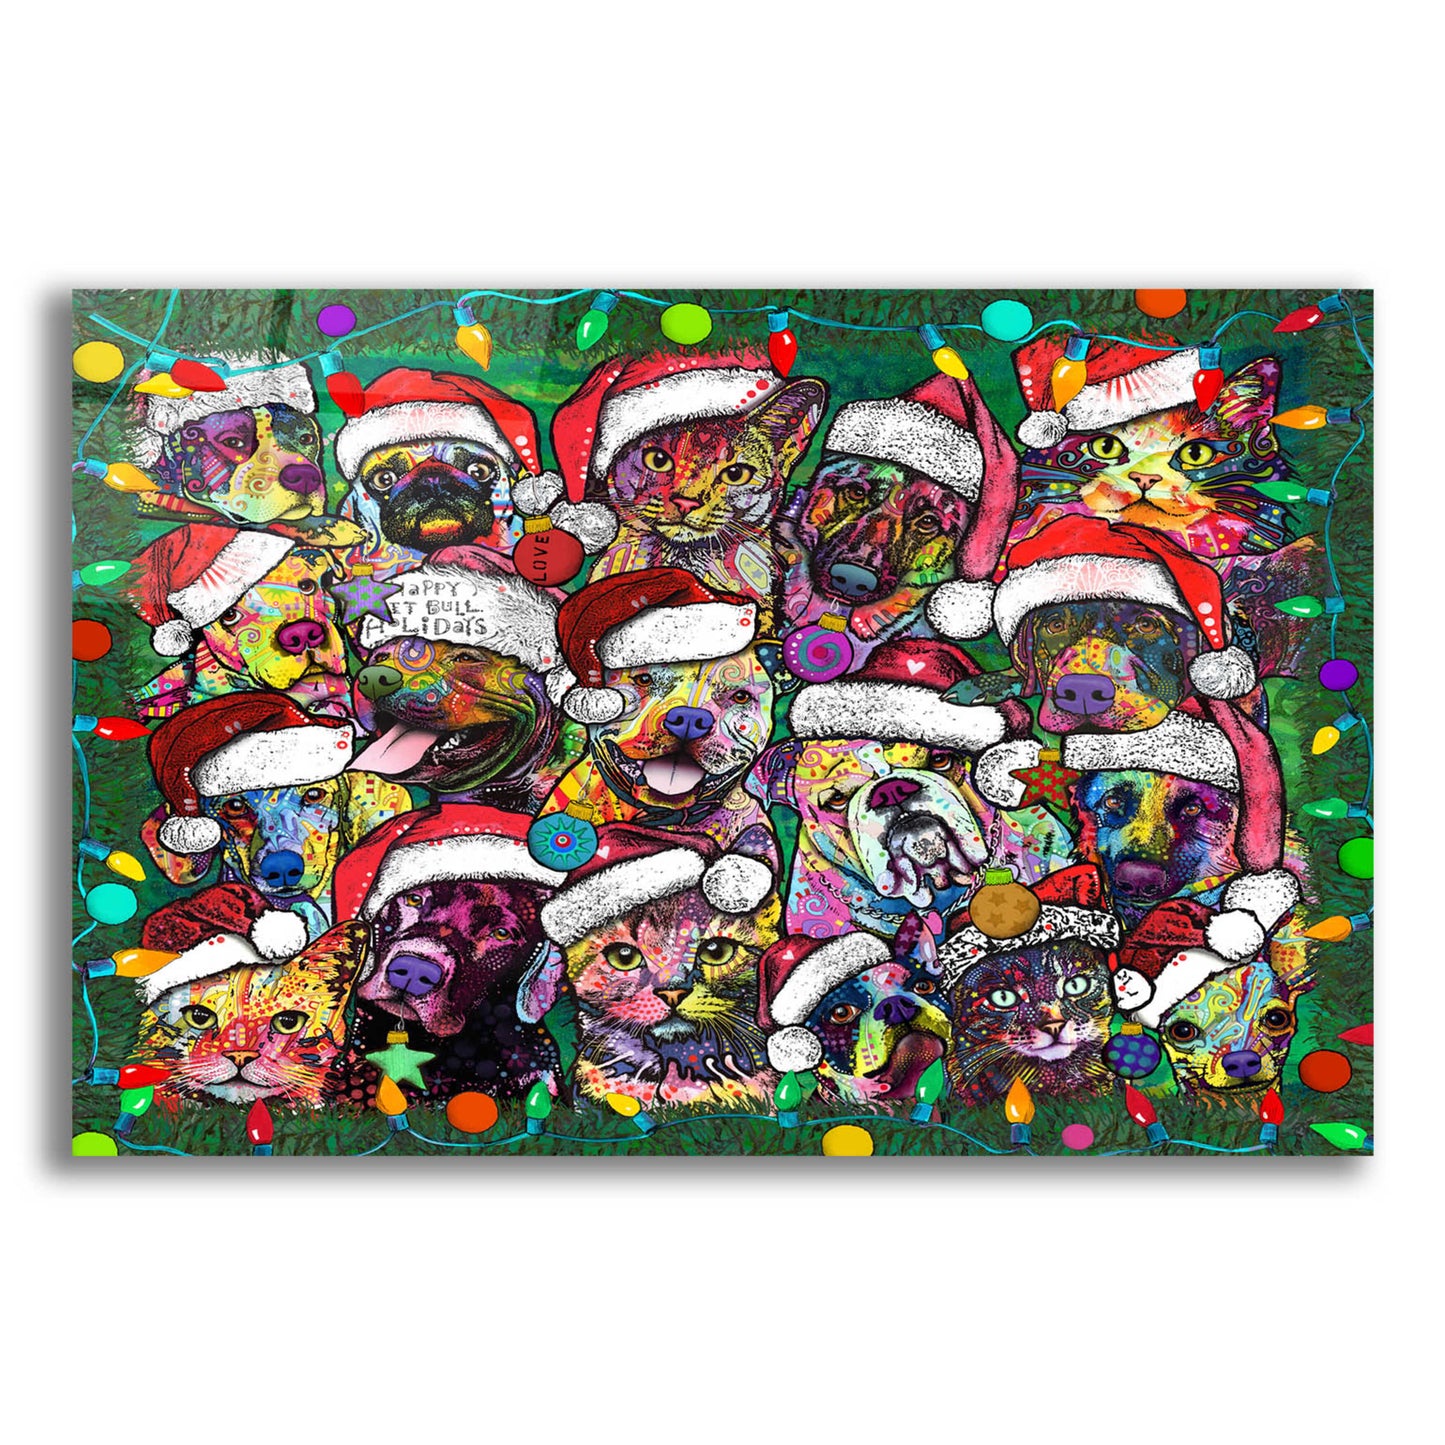 Epic Art 'Christmas Collage' by Dean Russo, Acrylic Glass Wall Art,24x16